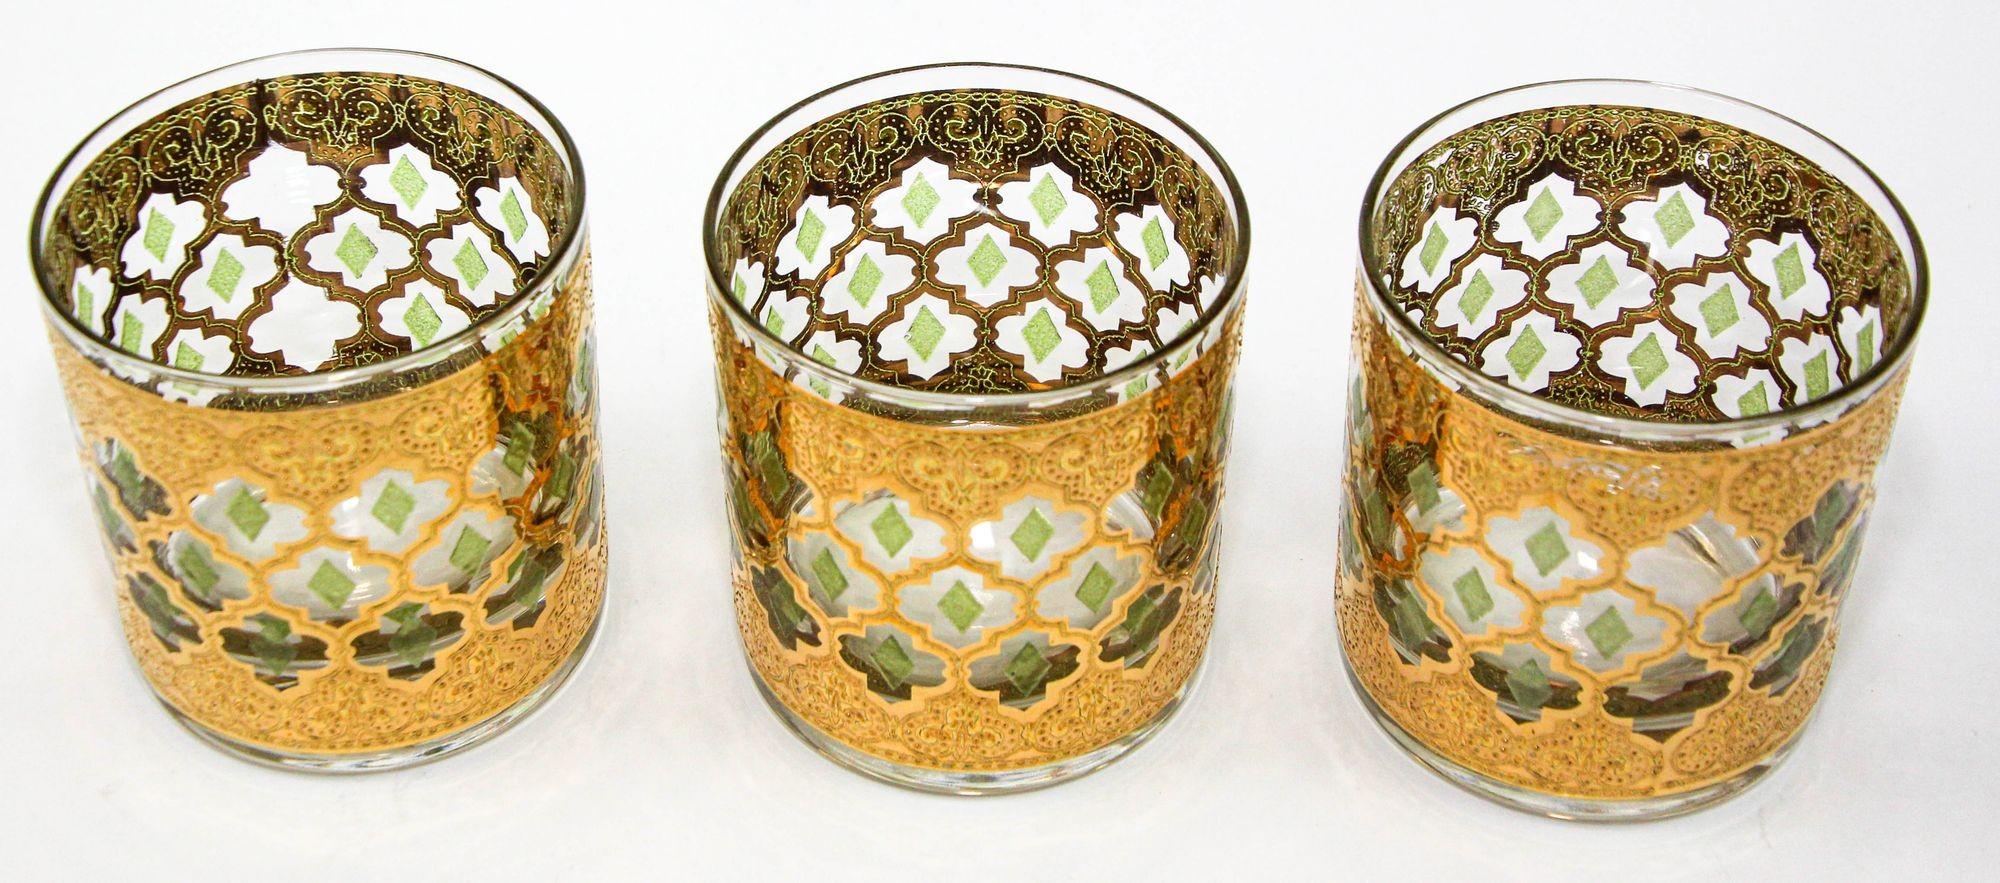 Hollywood Regency Vintage Set of 3 Old Fashioned Valencia by Culver with 22-Karat Gold For Sale